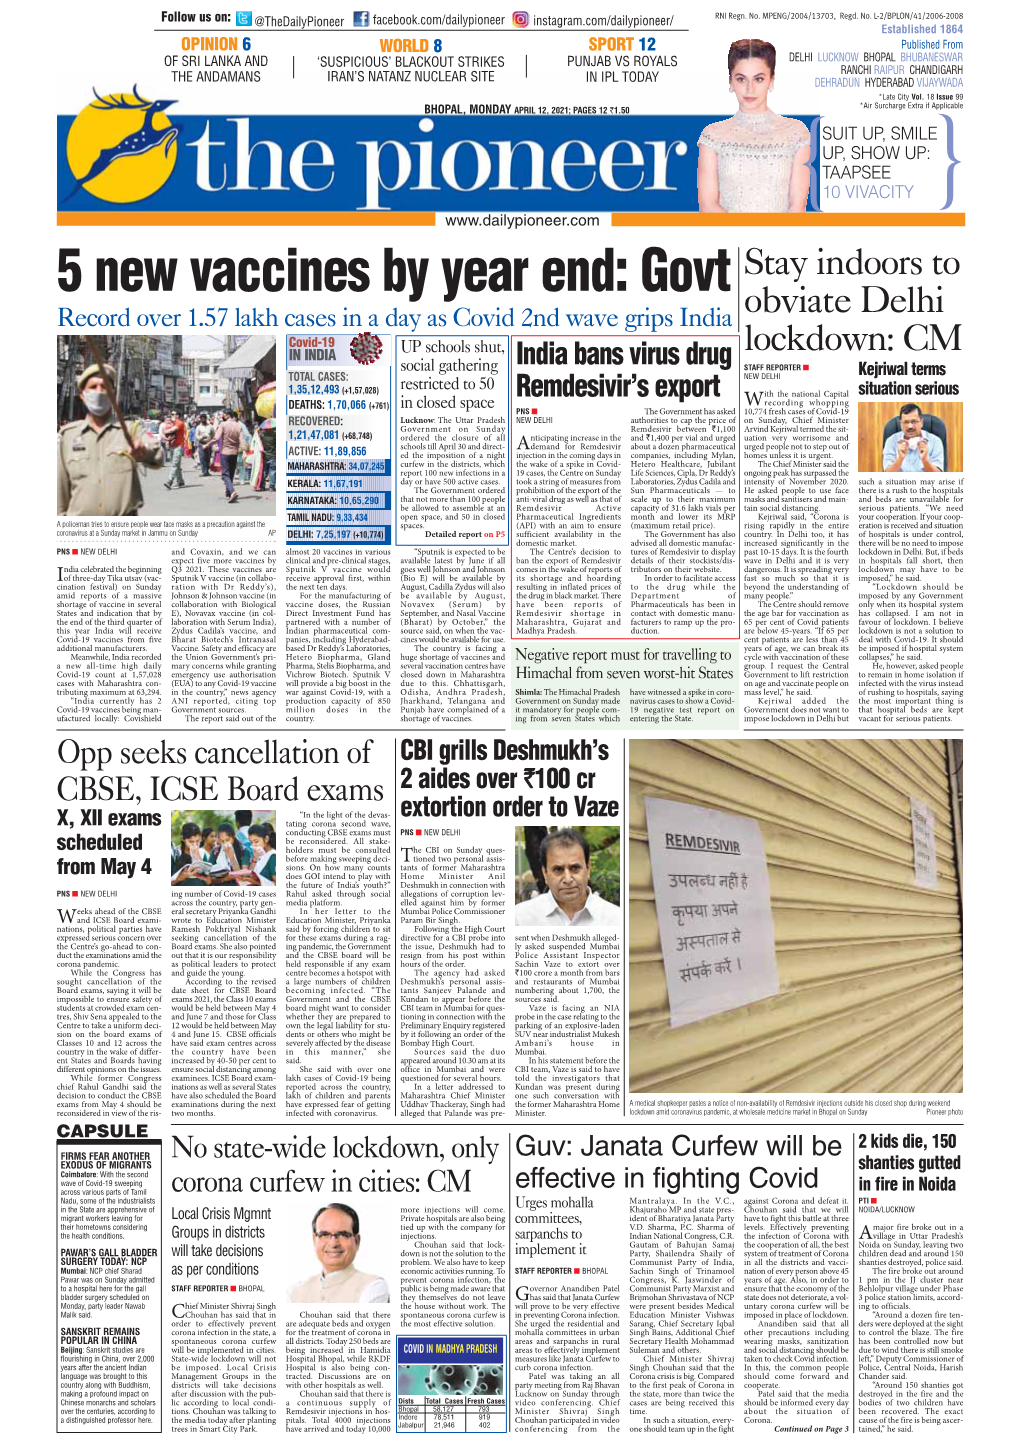 Bhopal, While RKDF Measures Like Janata Curfew to Chief Minister Shivraj Taken to Check Covid Infection